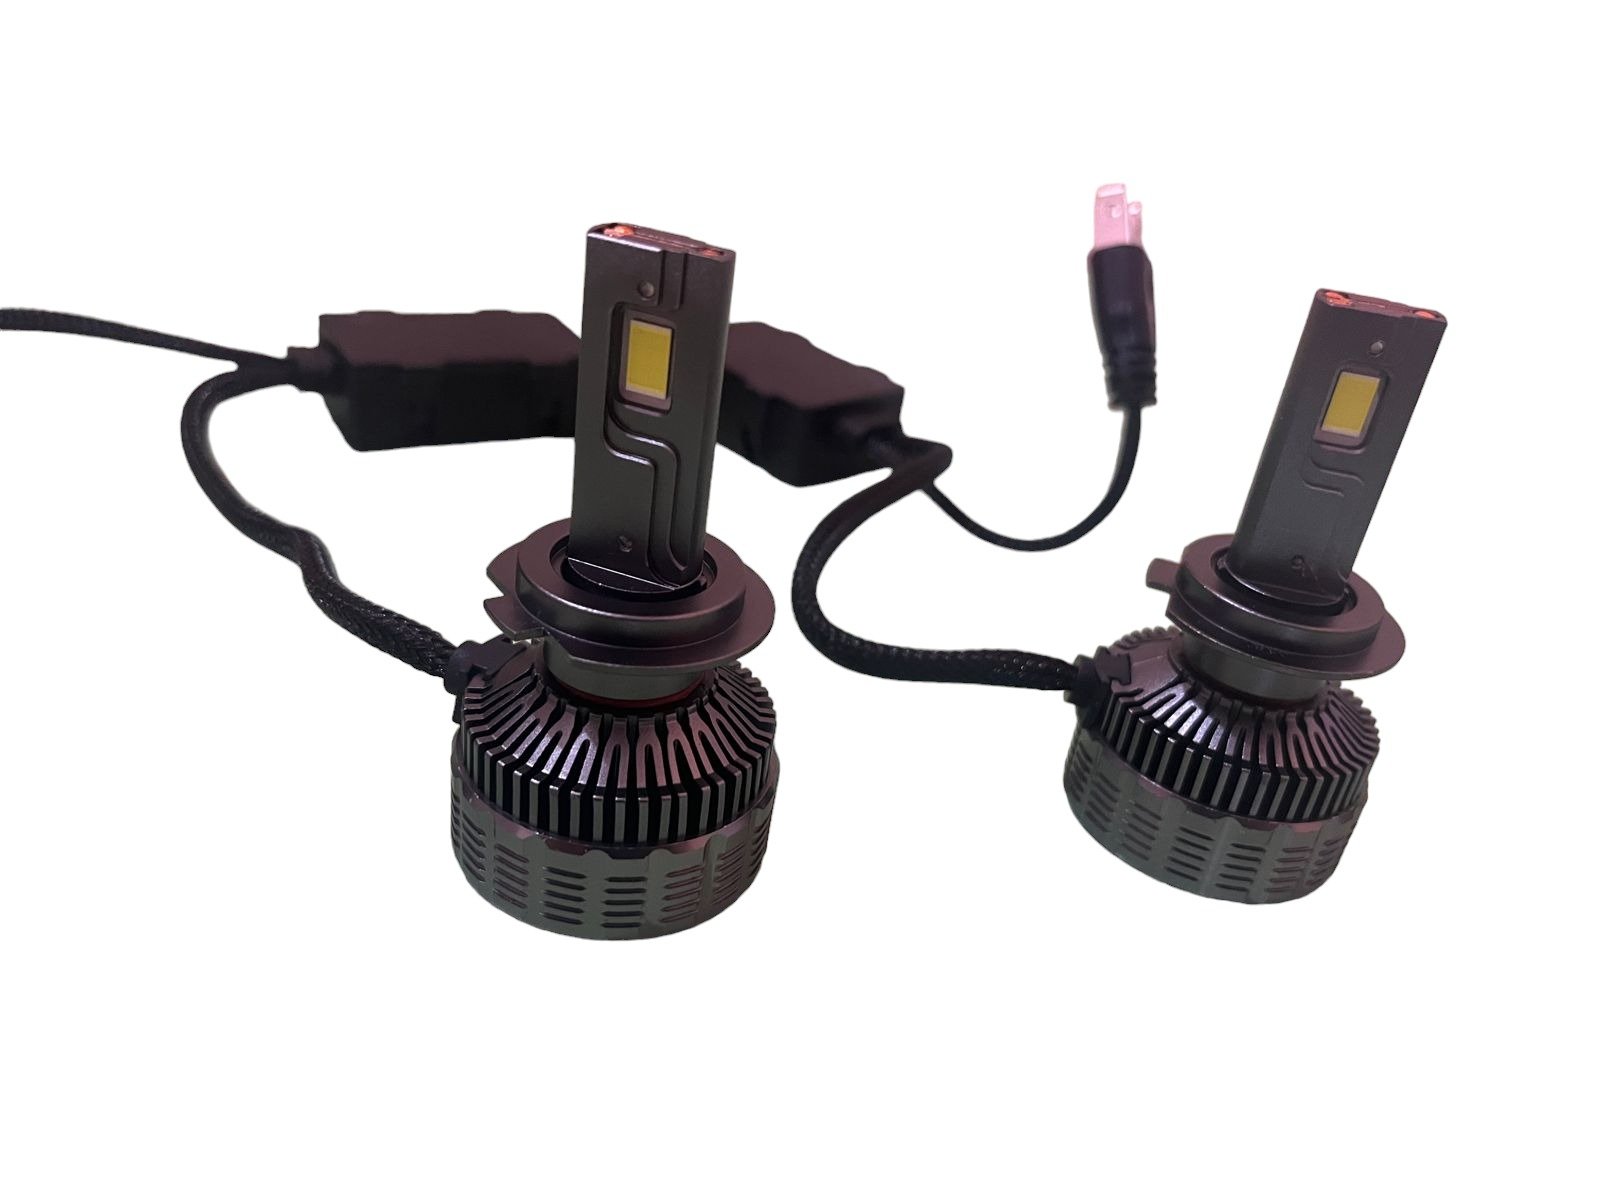 H11 High Quality Super Bright LED For Car 300W/30000LM Pair 6500K With 1Year Warranty (H8/H11/H16) Image 